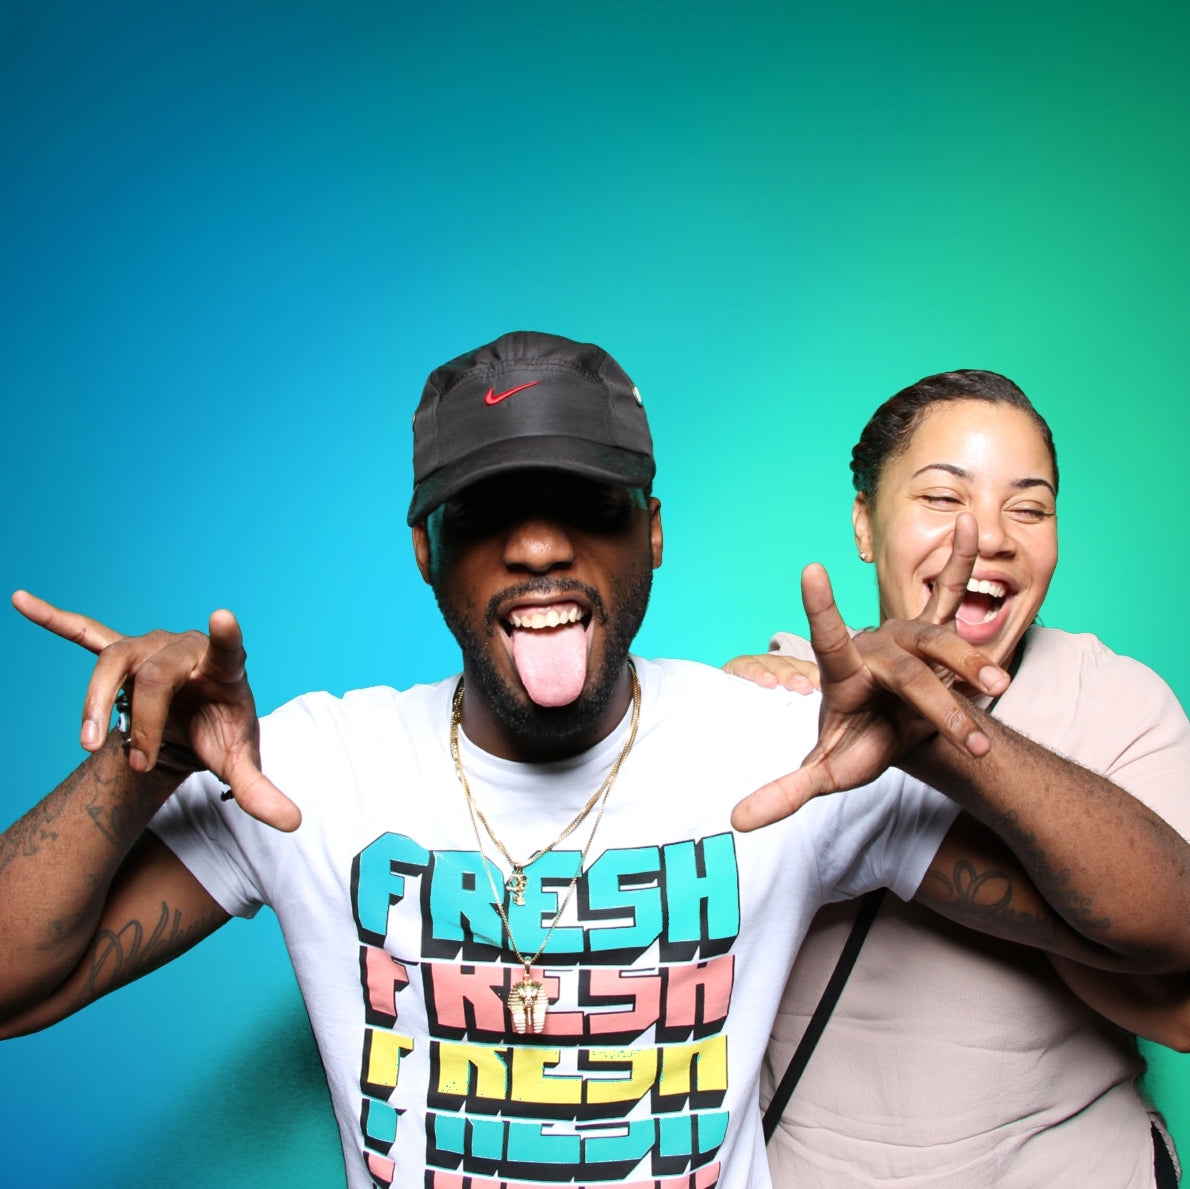 Man and Woman having fun in a photo booth with a blue and green gradient background